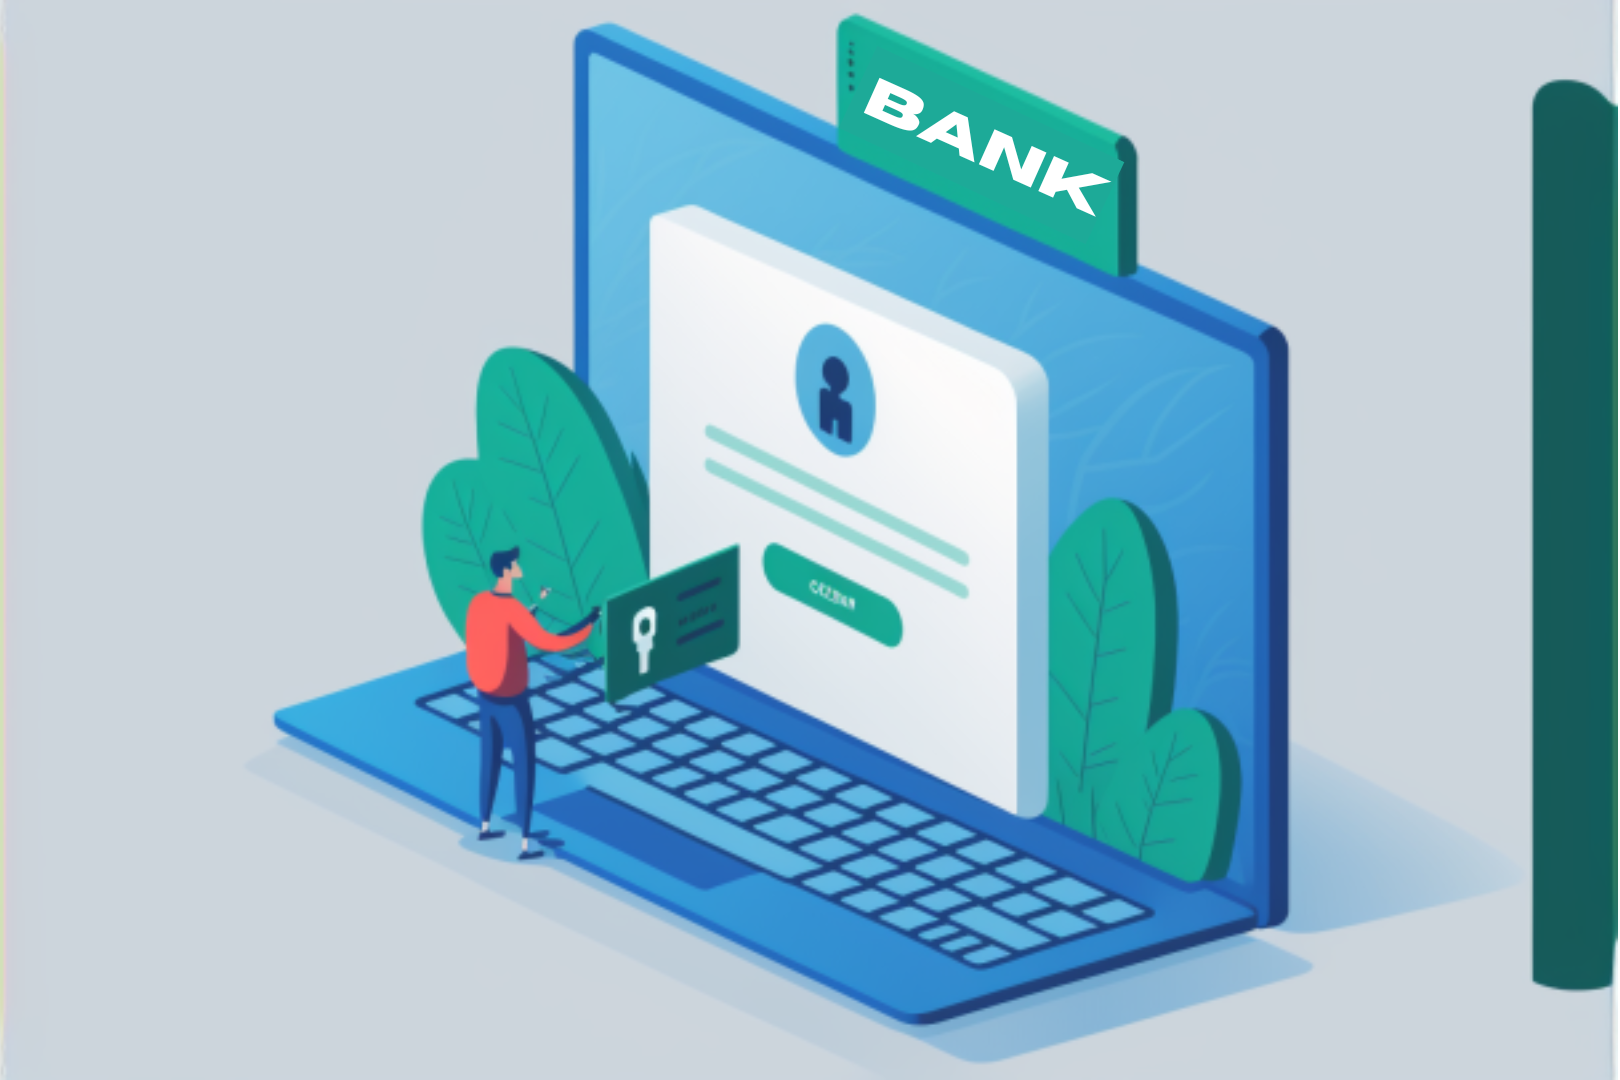 Can CroxyProxy be used for online banking or sensitive transactions